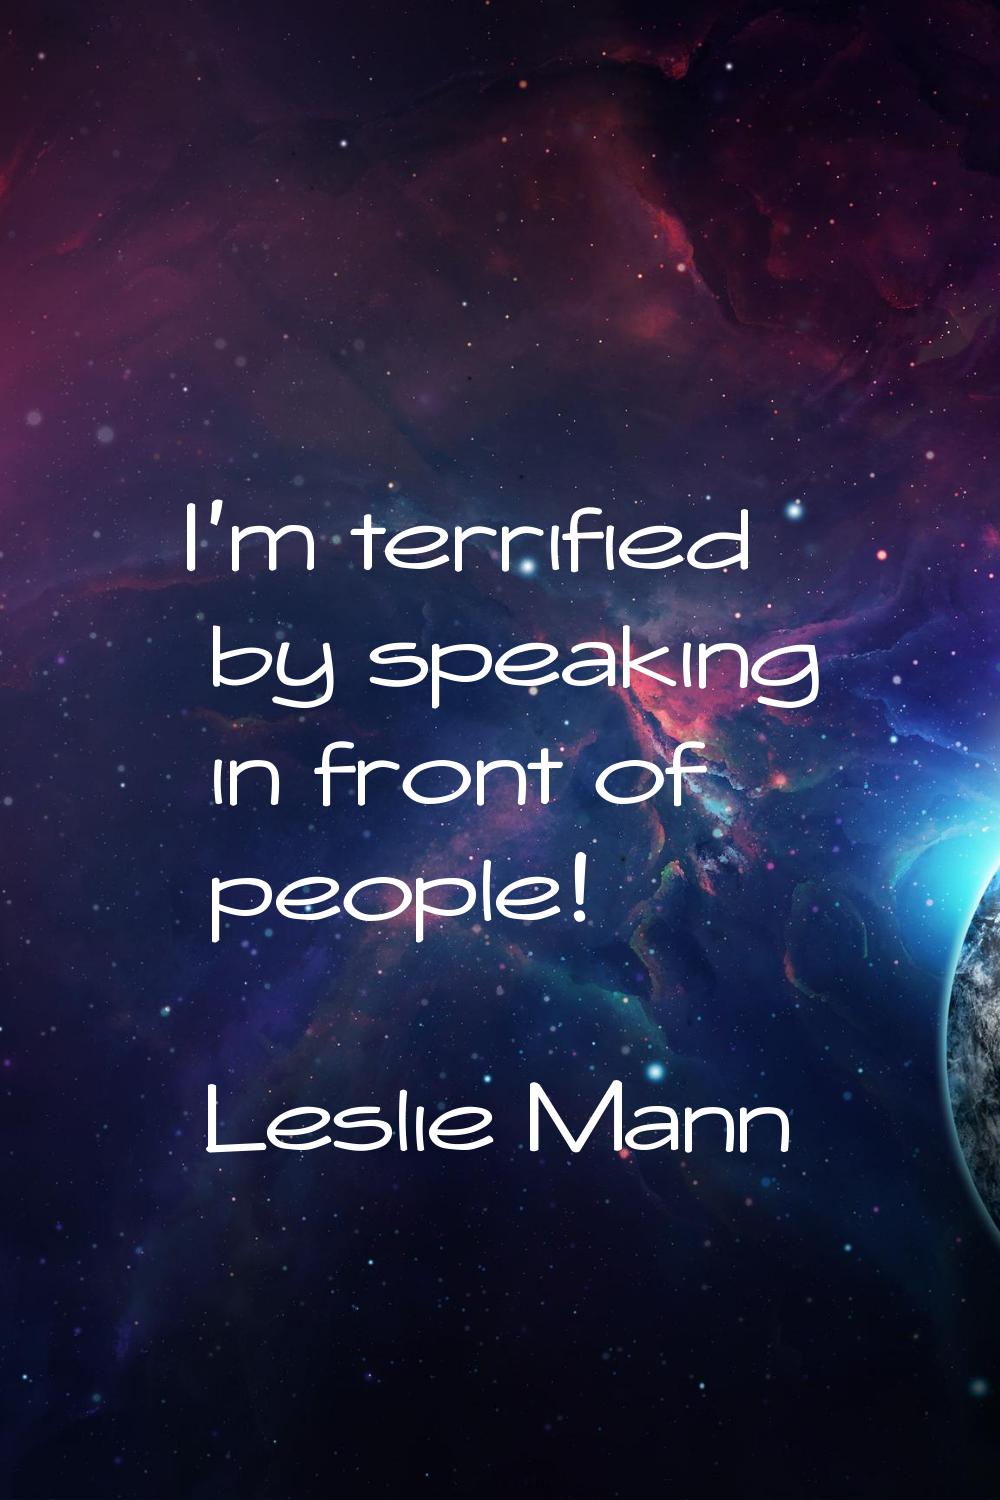 I'm terrified by speaking in front of people!